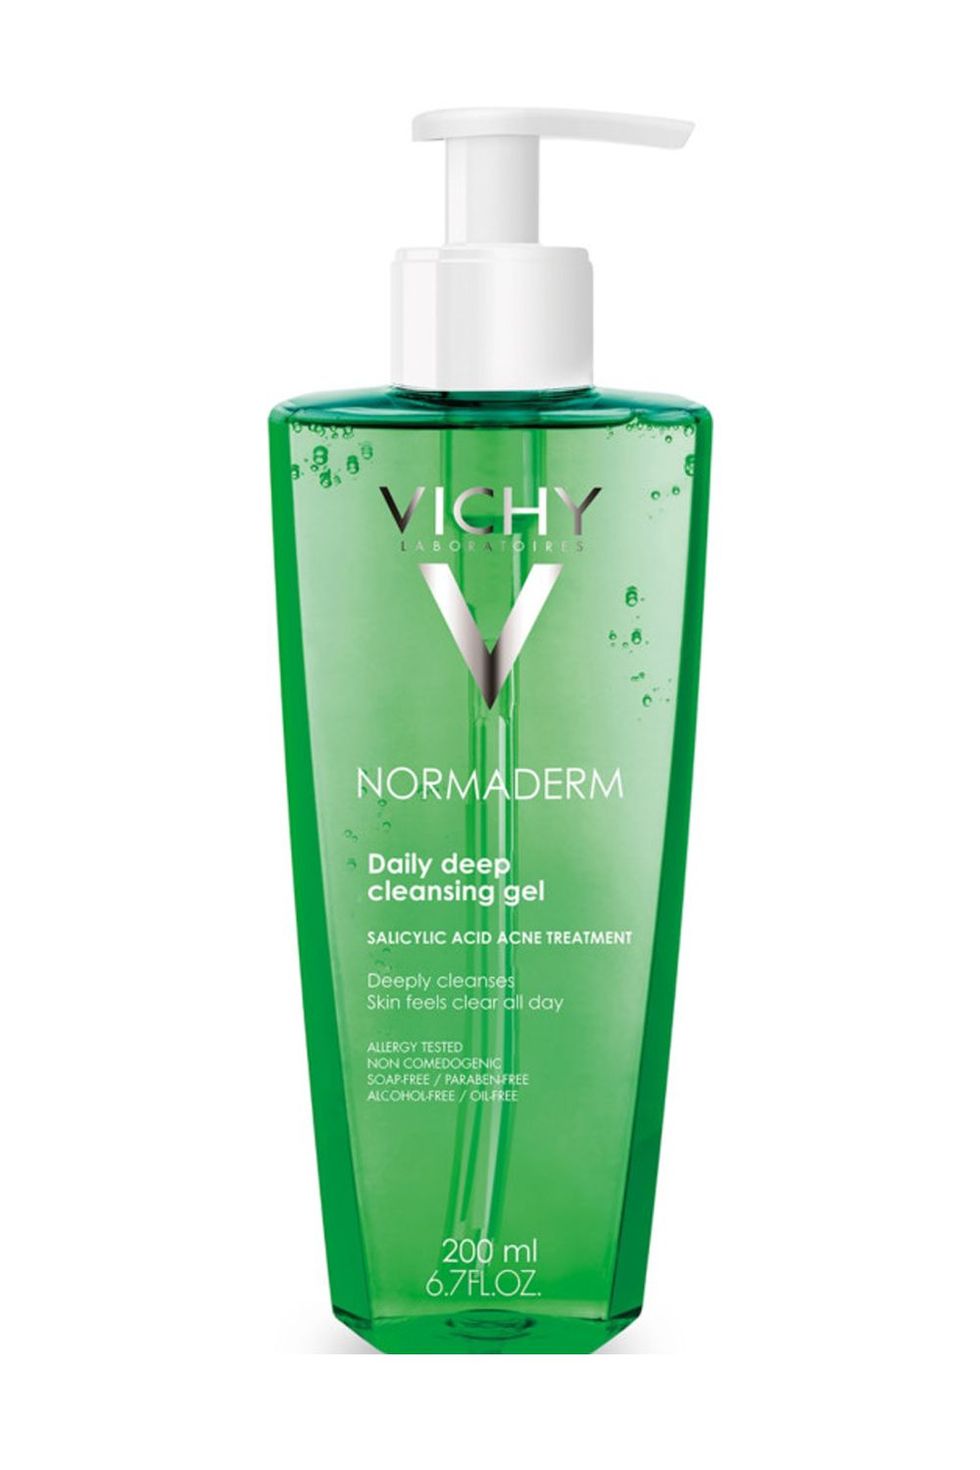 Vichy Normaderm Deep Cleansing Gel Face Wash